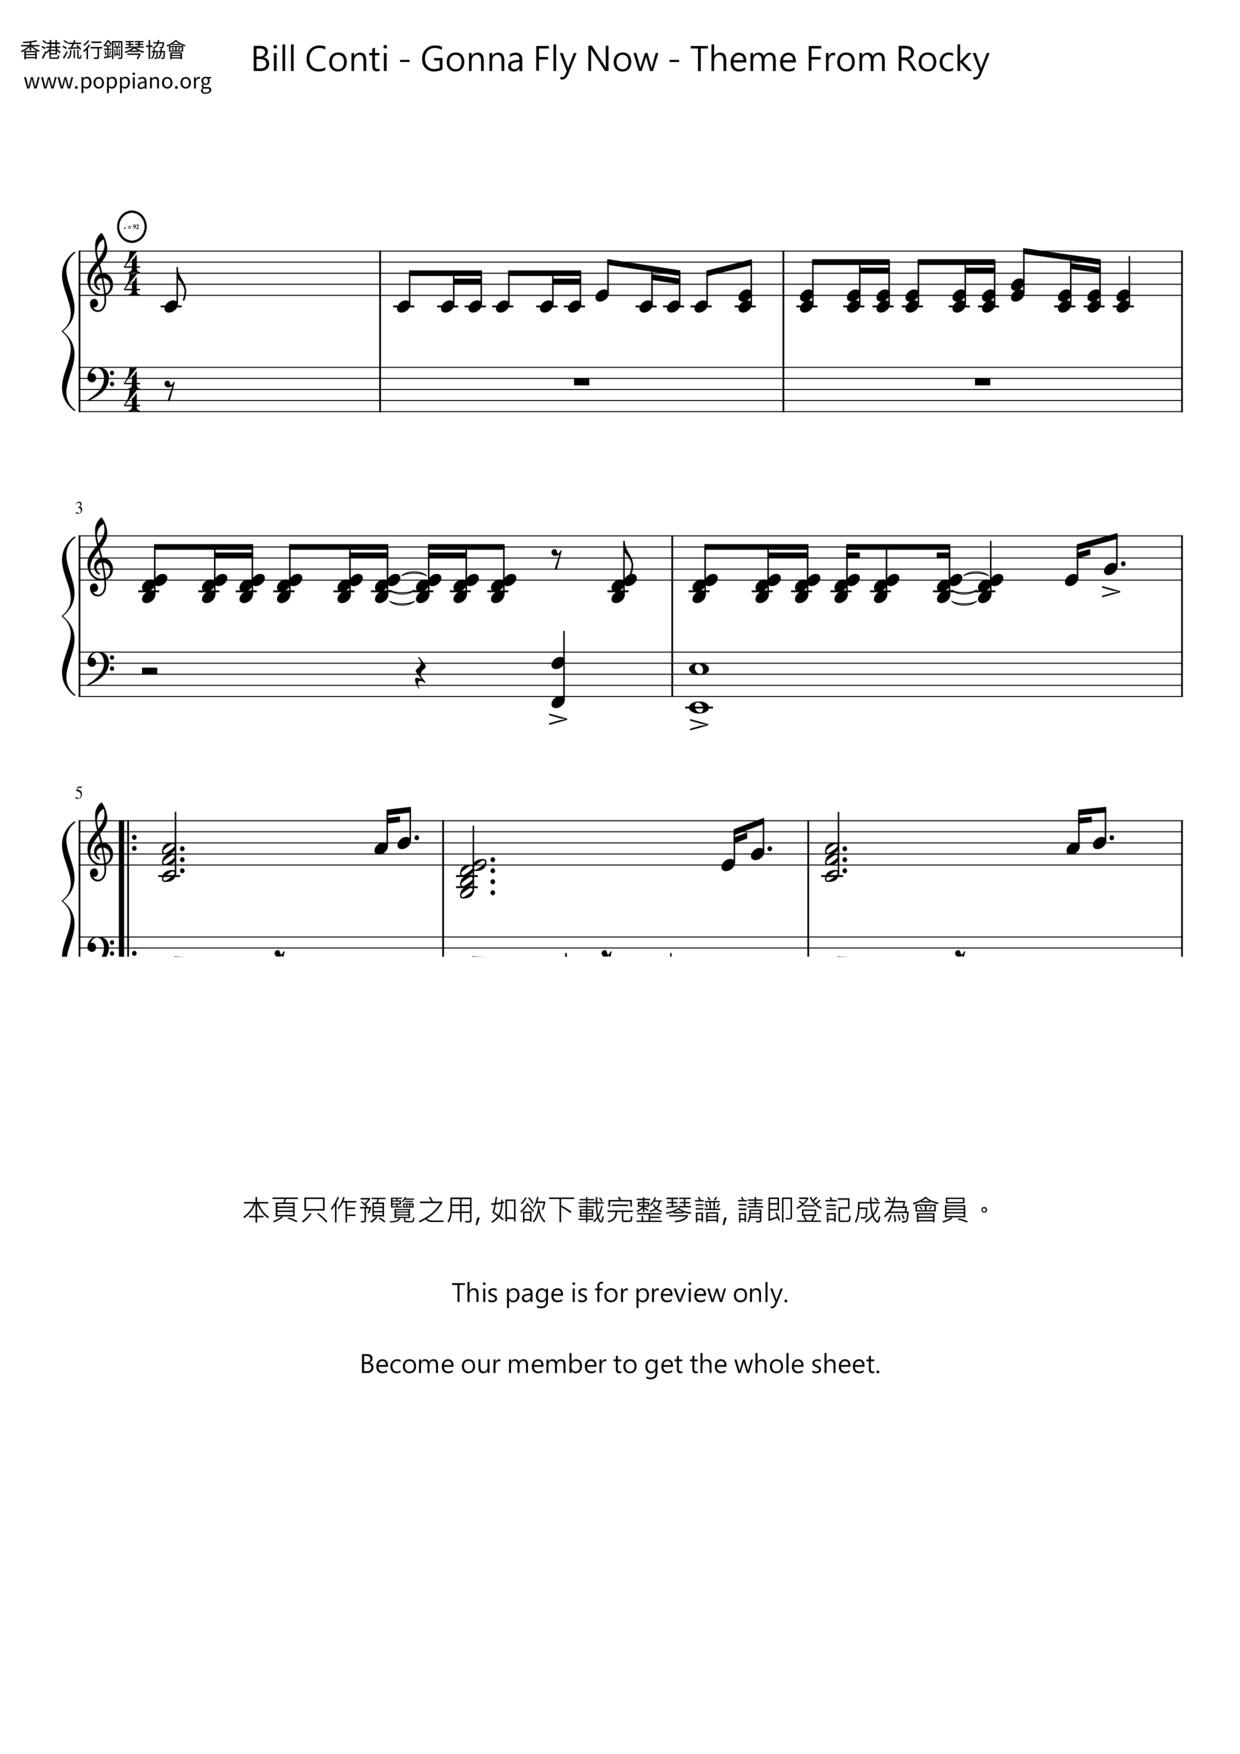 Gonna Fly Now - Theme From Rocky琴谱